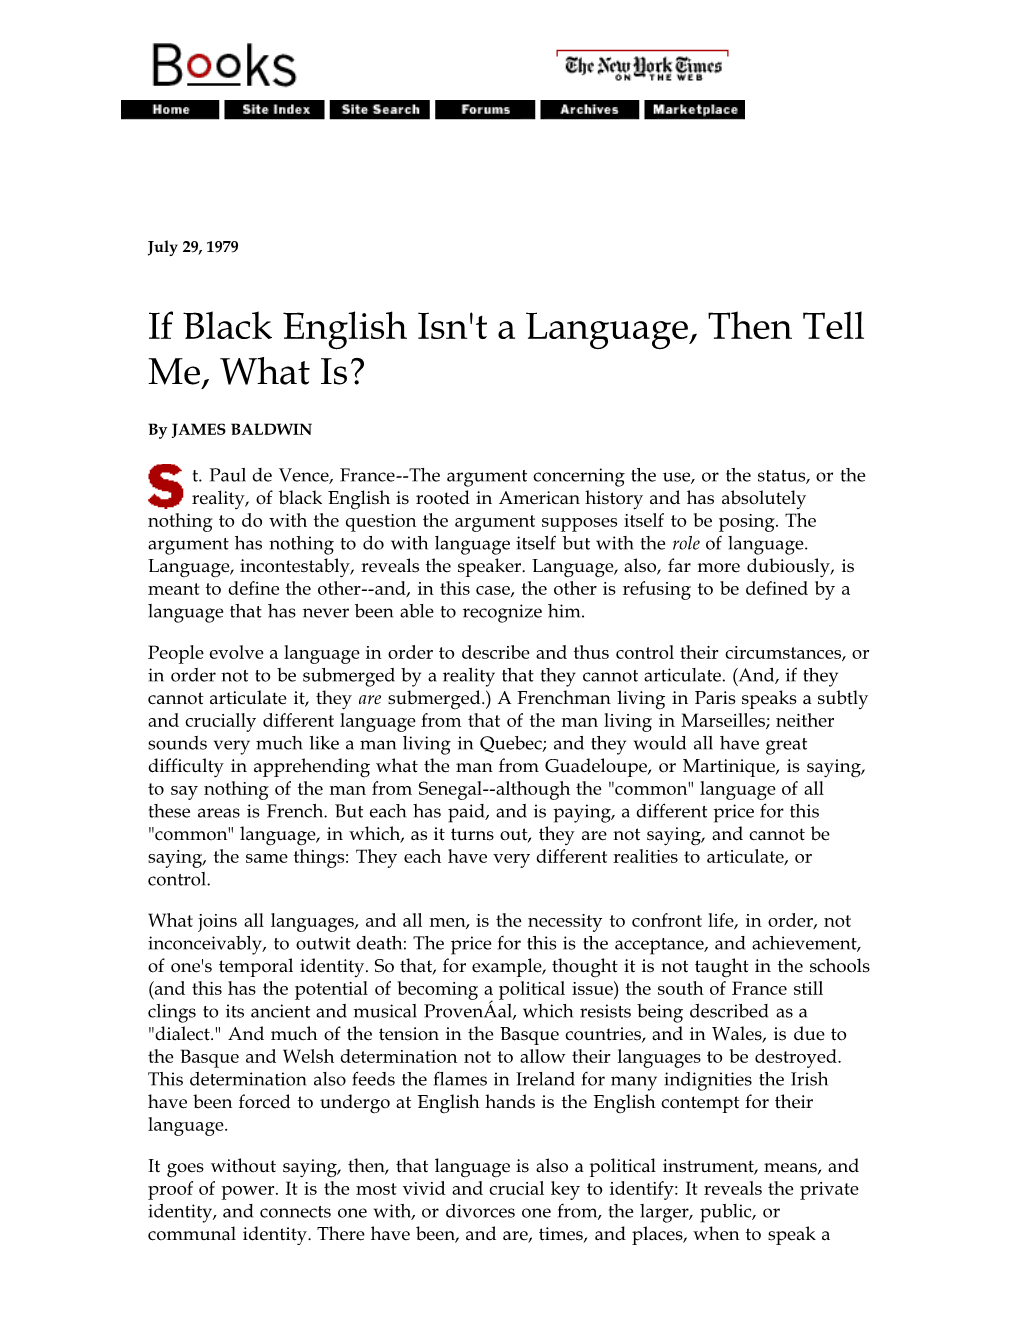 If Black English Isn't a Language, Then Tell Me, What Is?